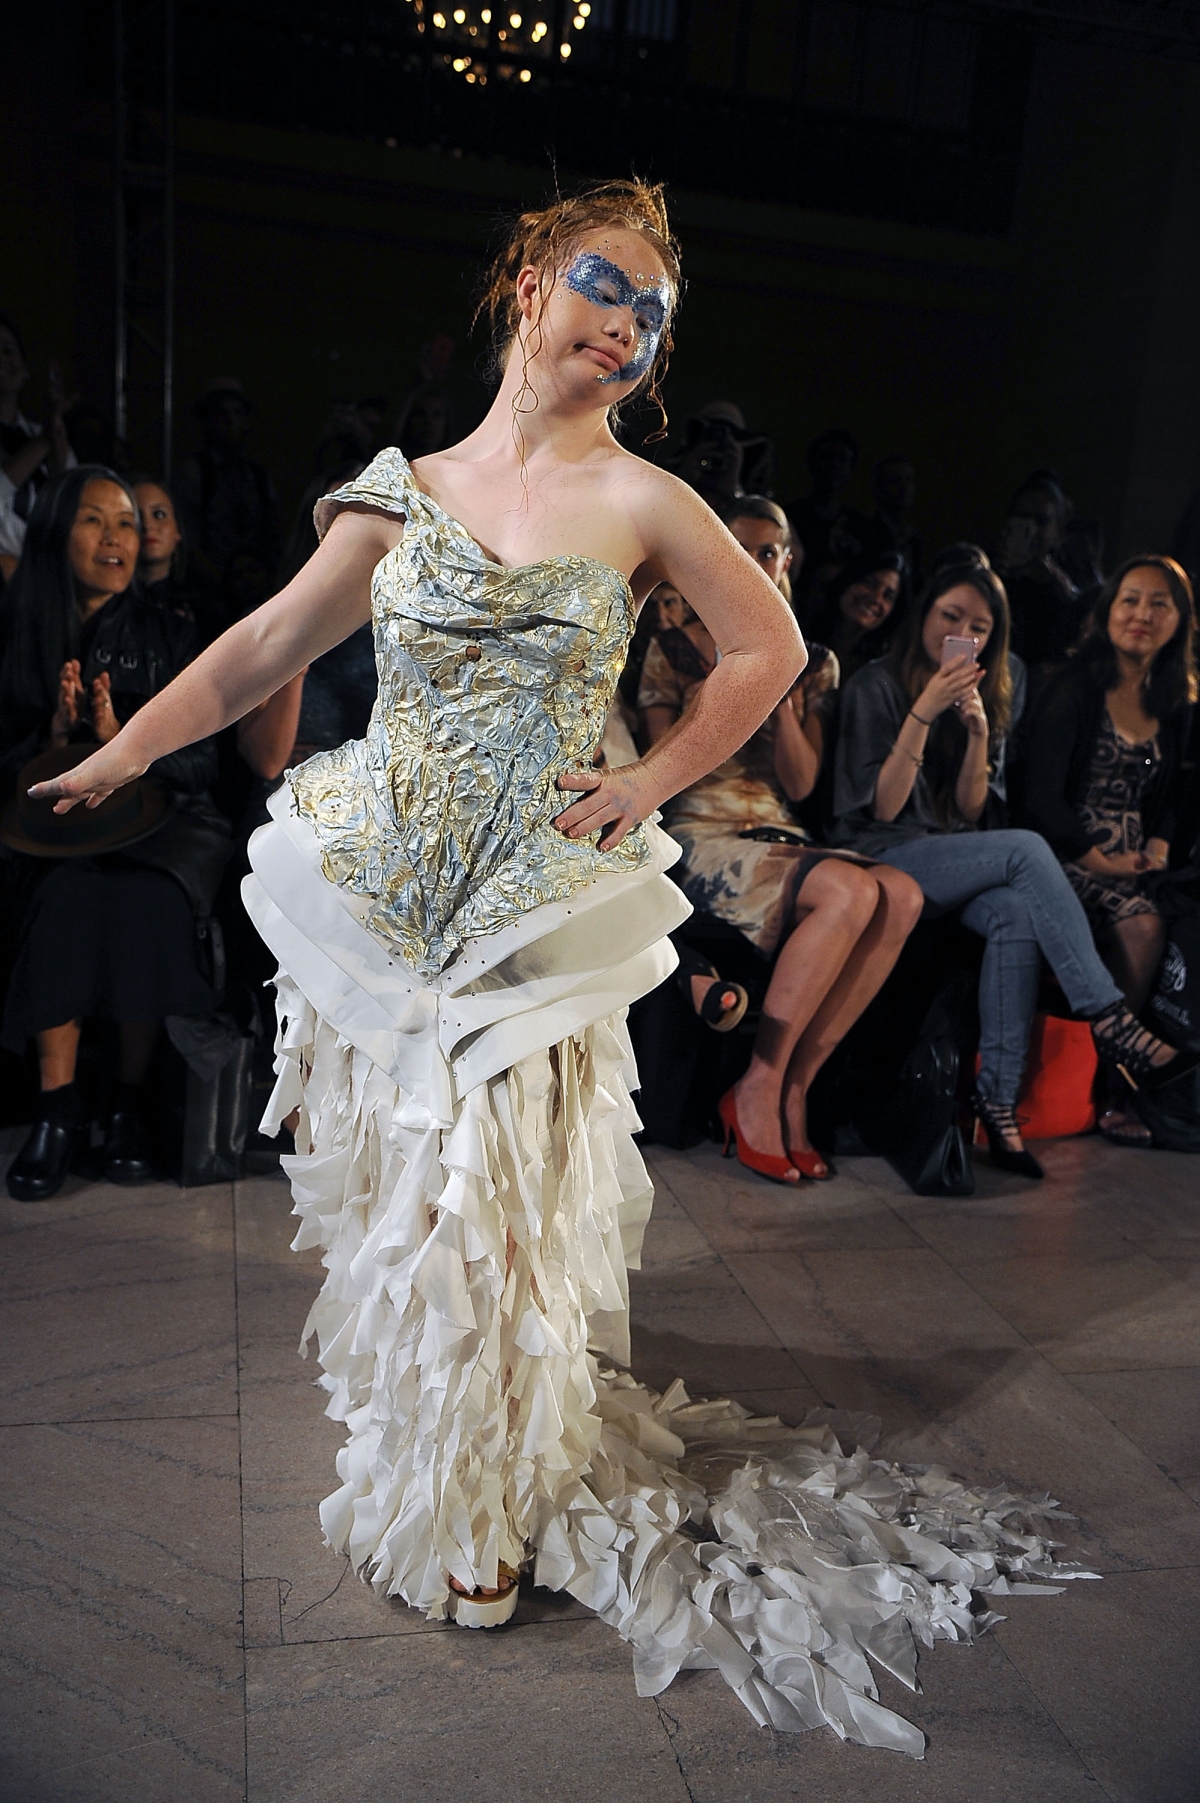 Down's Syndrome model Madeline Stuart wows New York Fashion Week